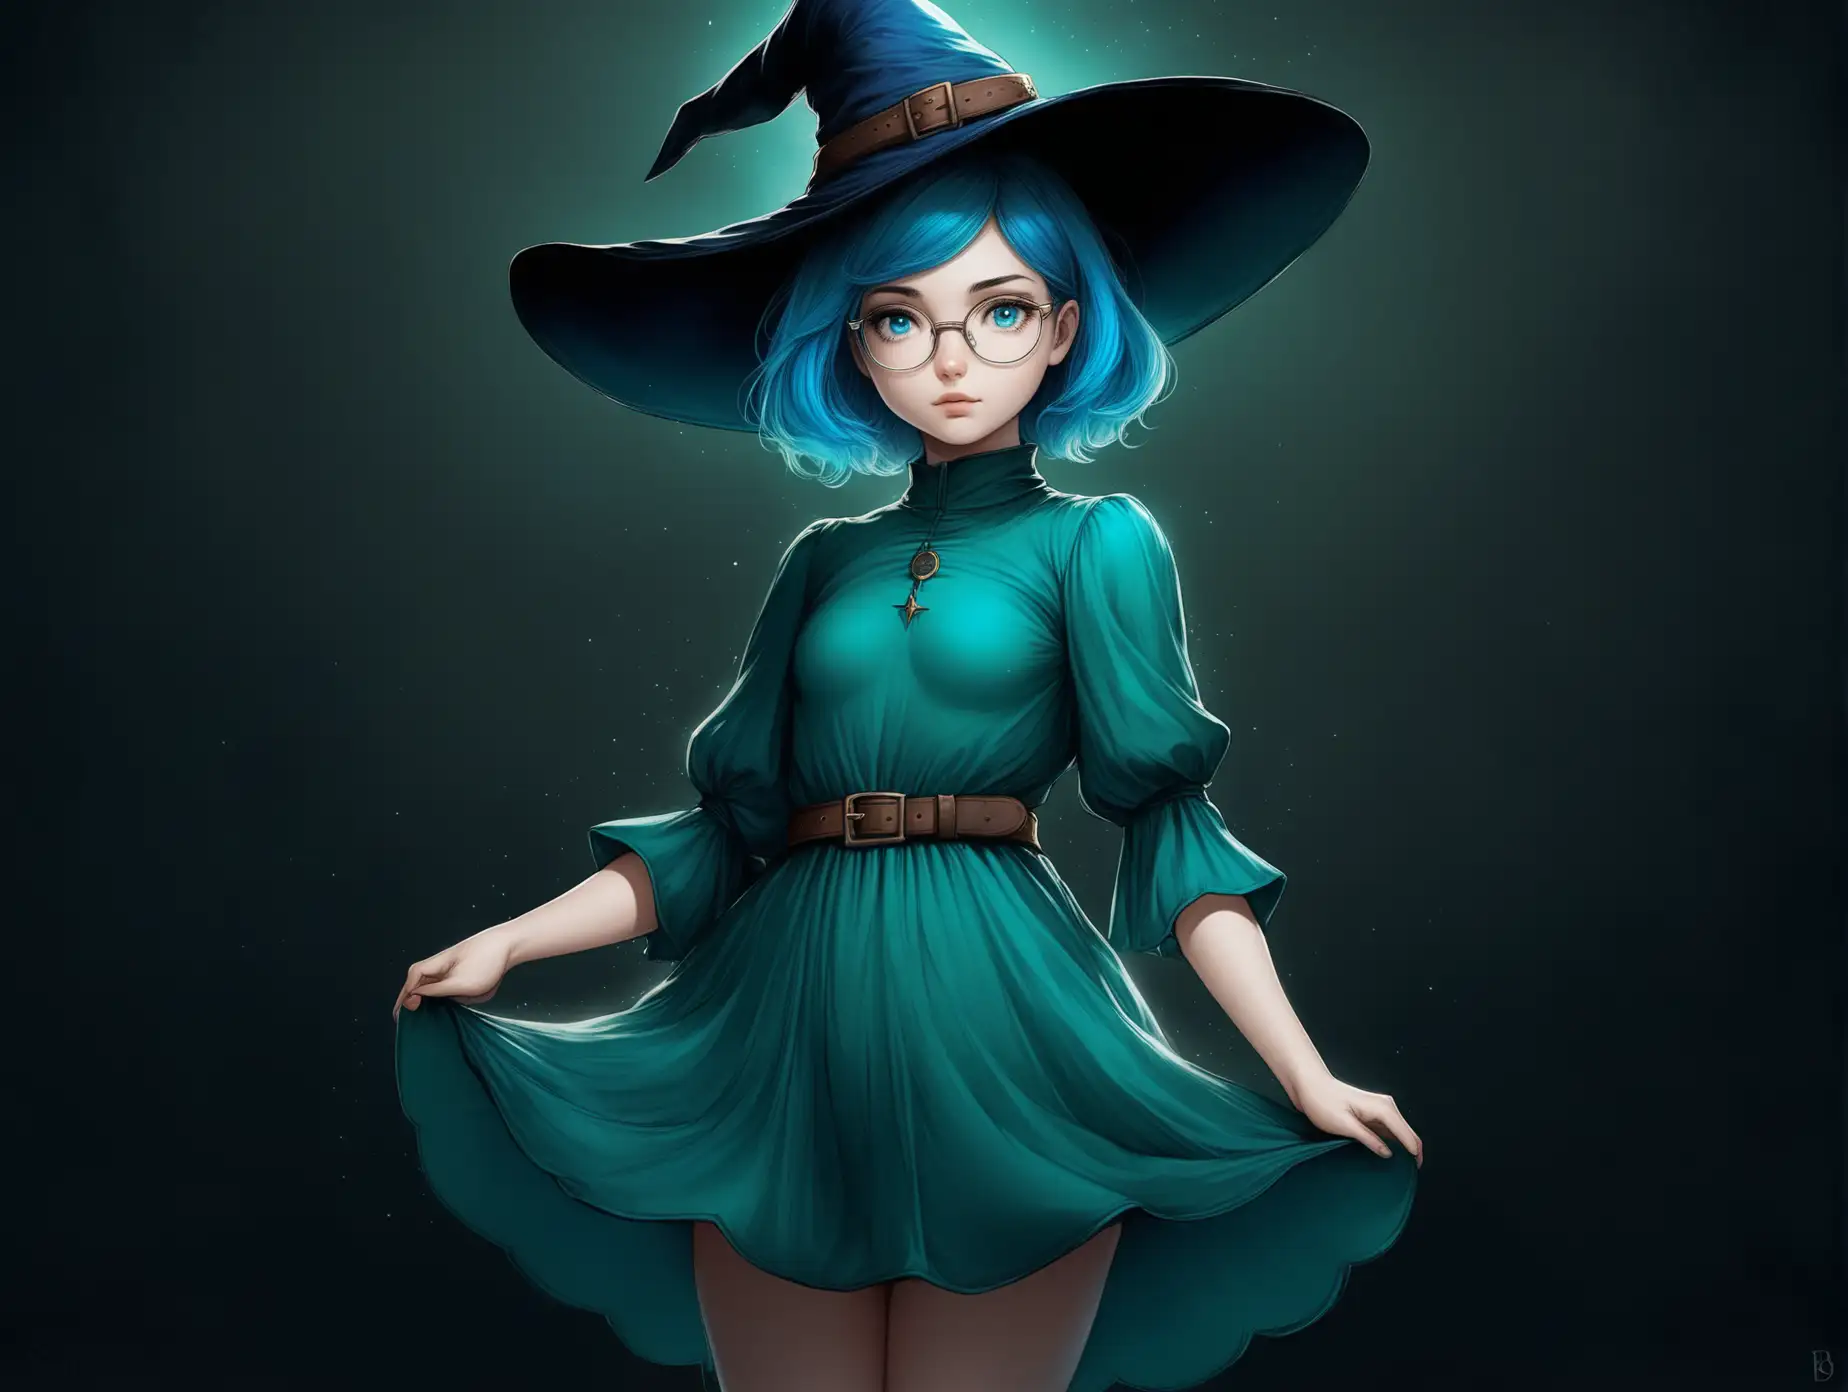 Young-HerbalistWitch-in-Dark-Fantasy-Anime-Style-with-Bright-Blue-Hair-and-Witch-Hat